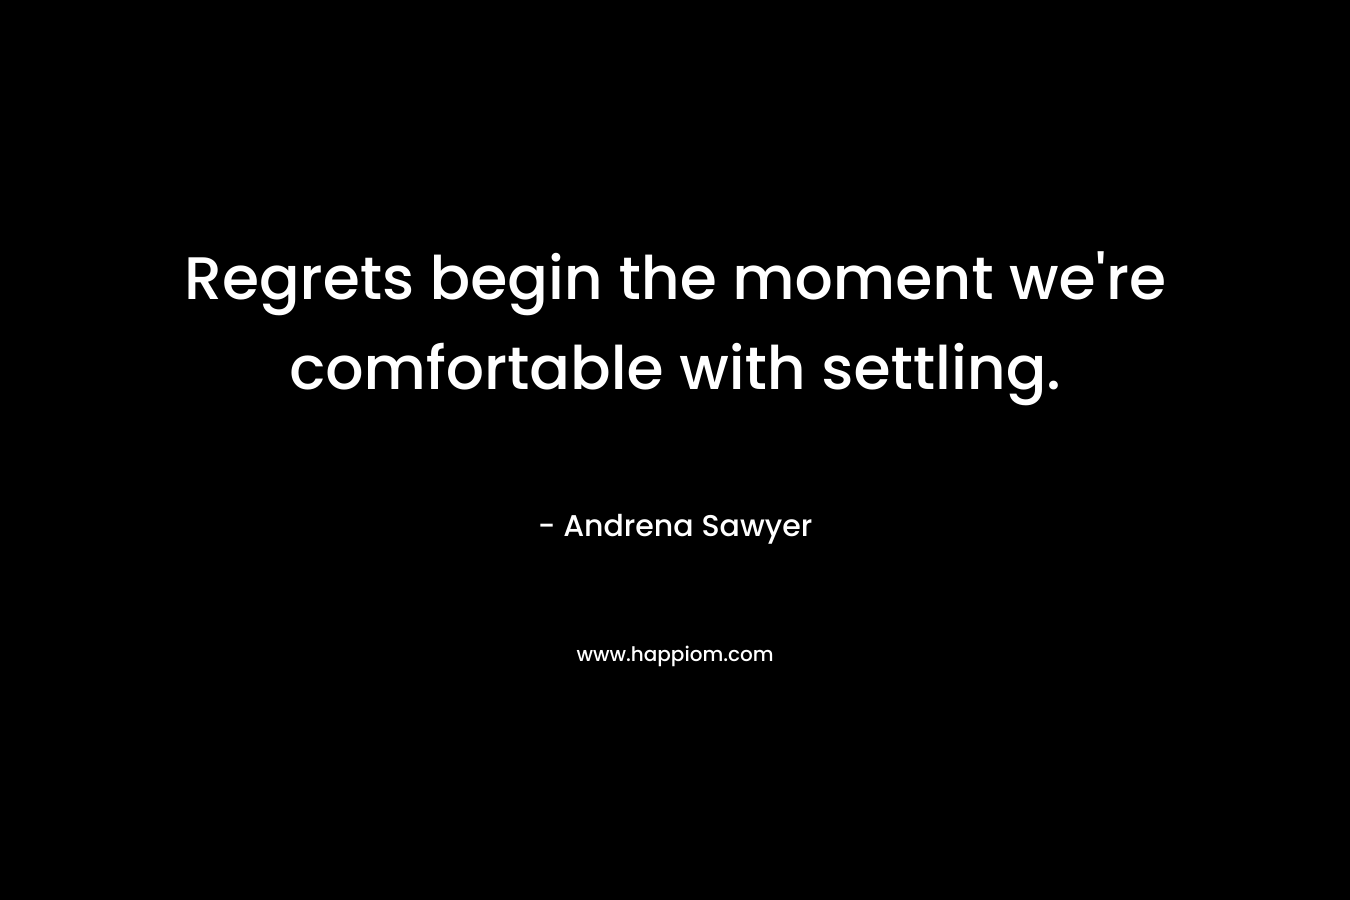 Regrets begin the moment we’re comfortable with settling. – Andrena Sawyer